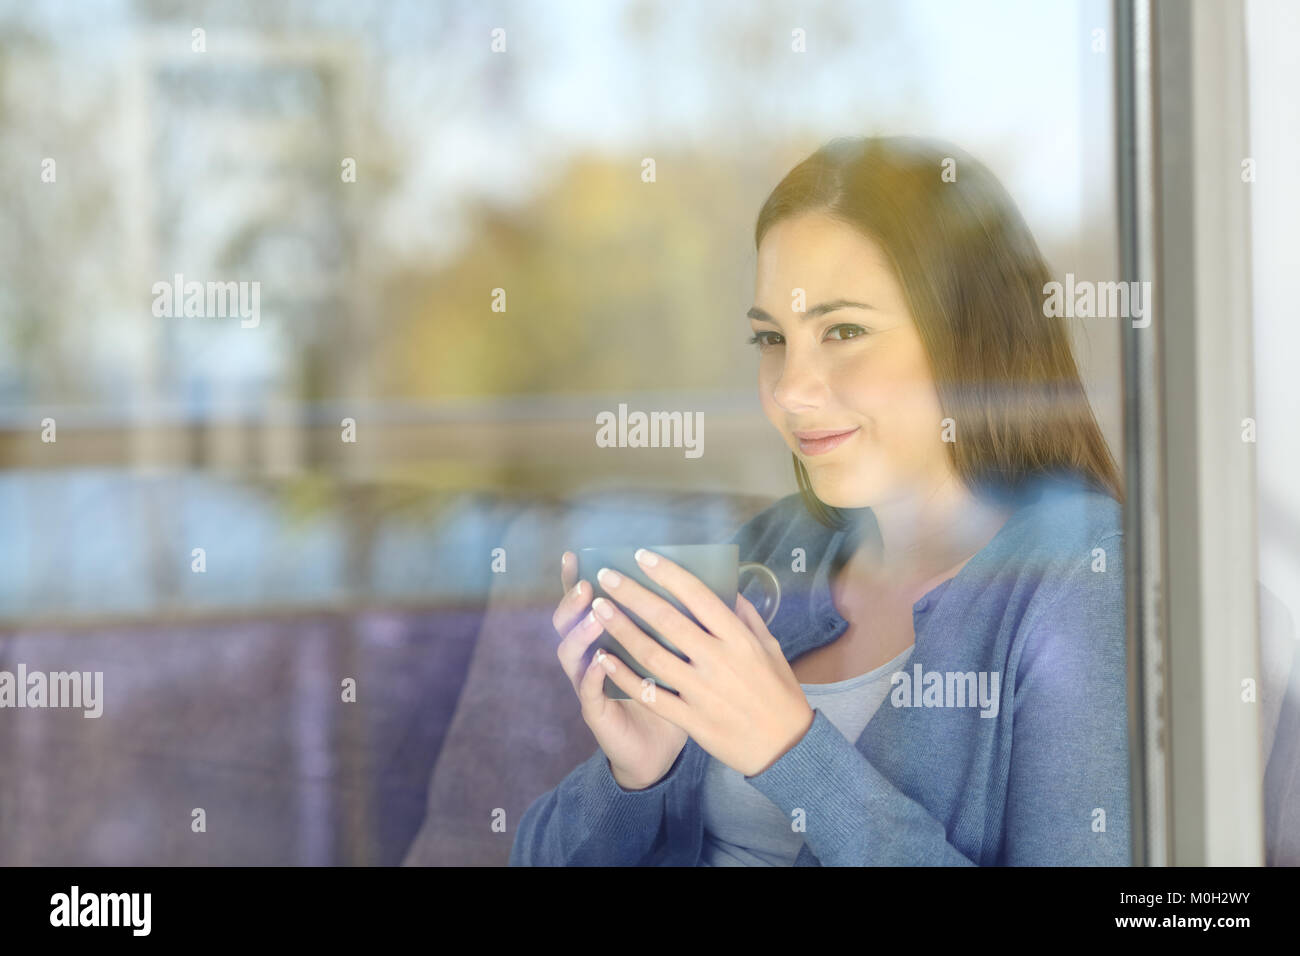 Serious woman looking forward through a window at home with outside reflections on the glass Stock Photo